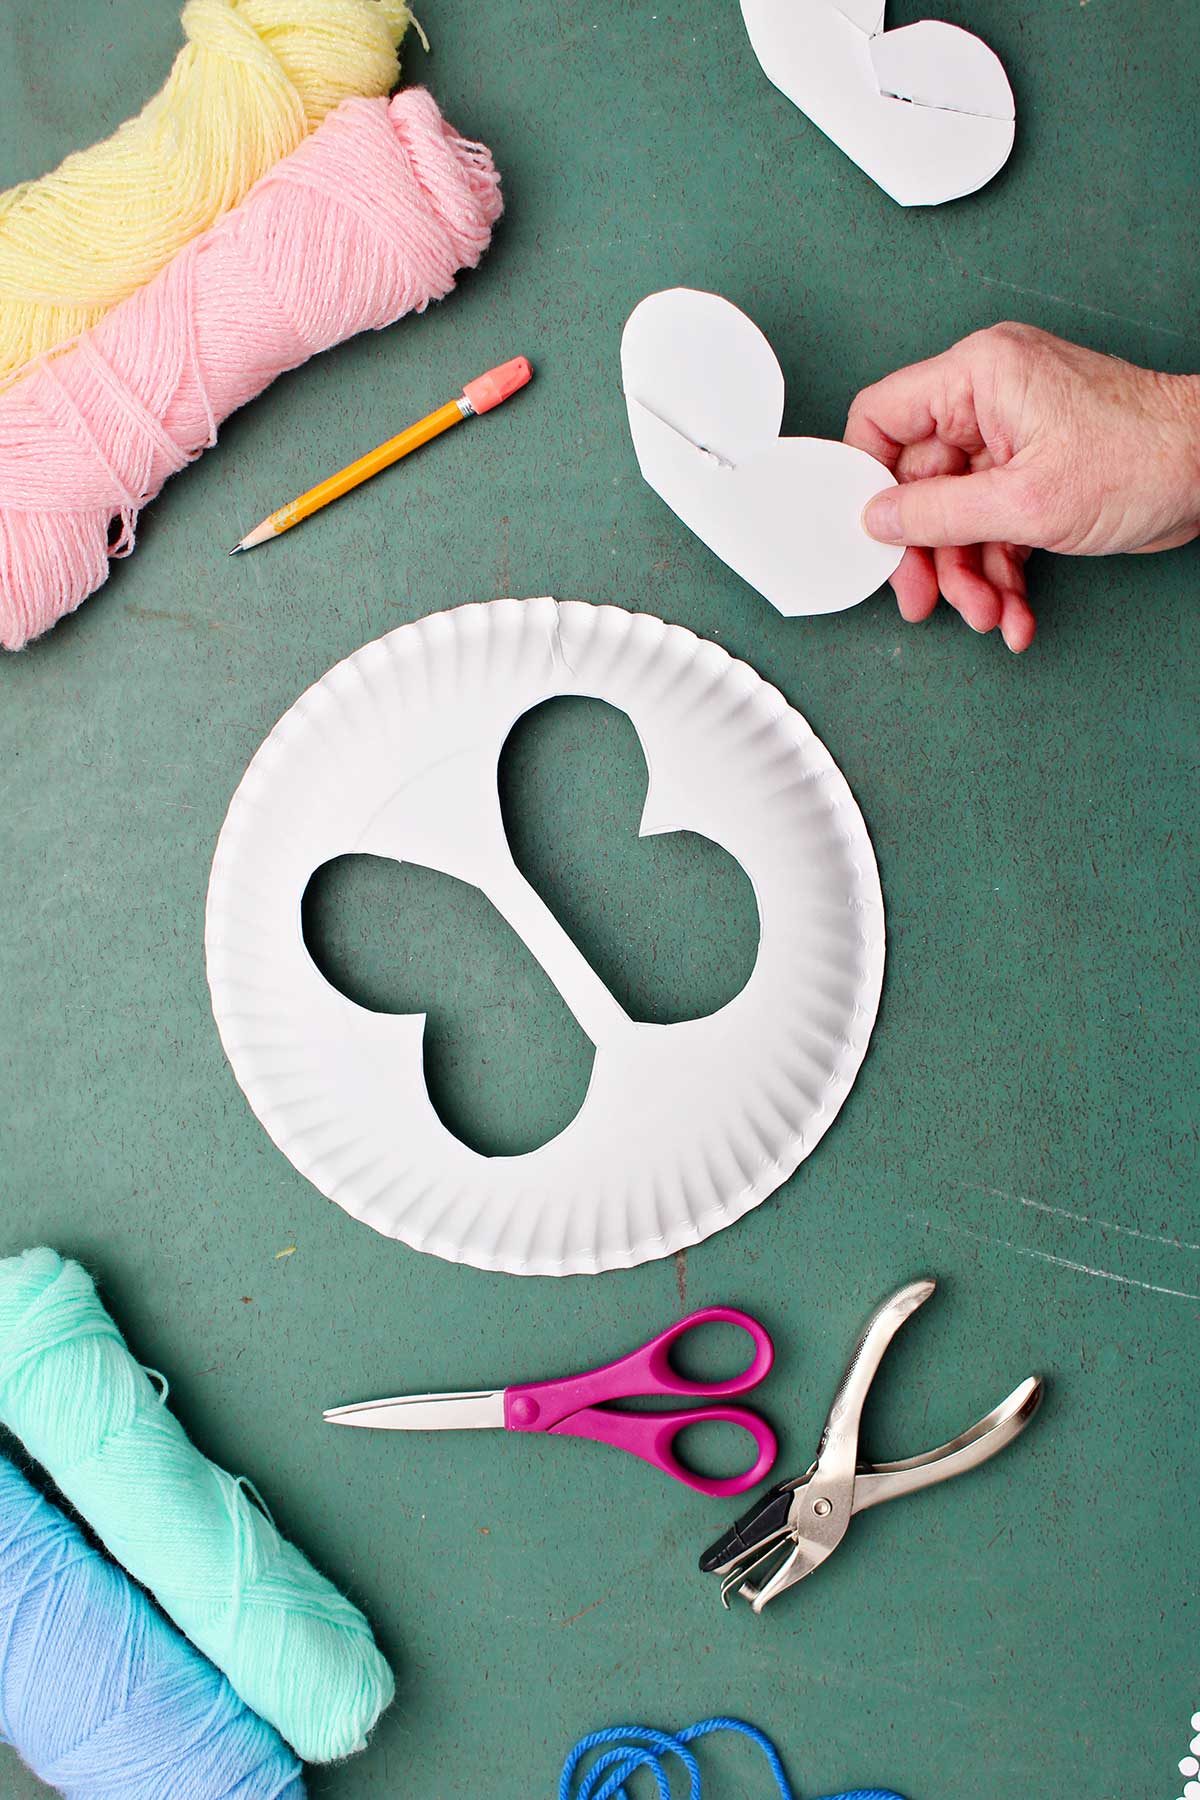 Hand holding butterfly wing cut out from paper plate with yarn and other supplies near by.